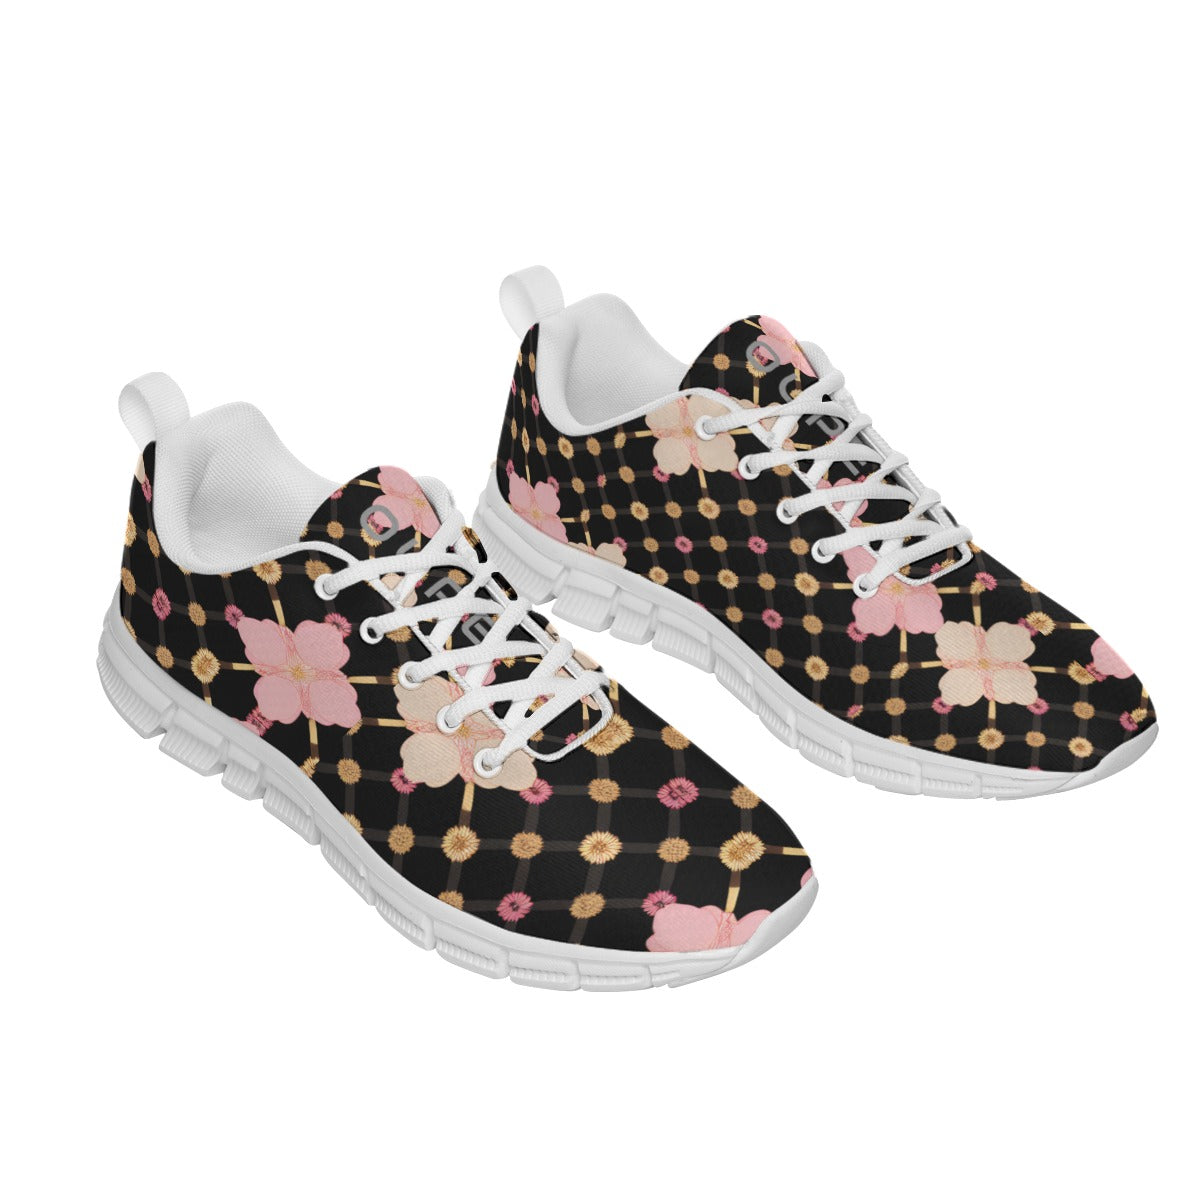 AC KAMI OUPE Women's Sports Shoes With White Sole